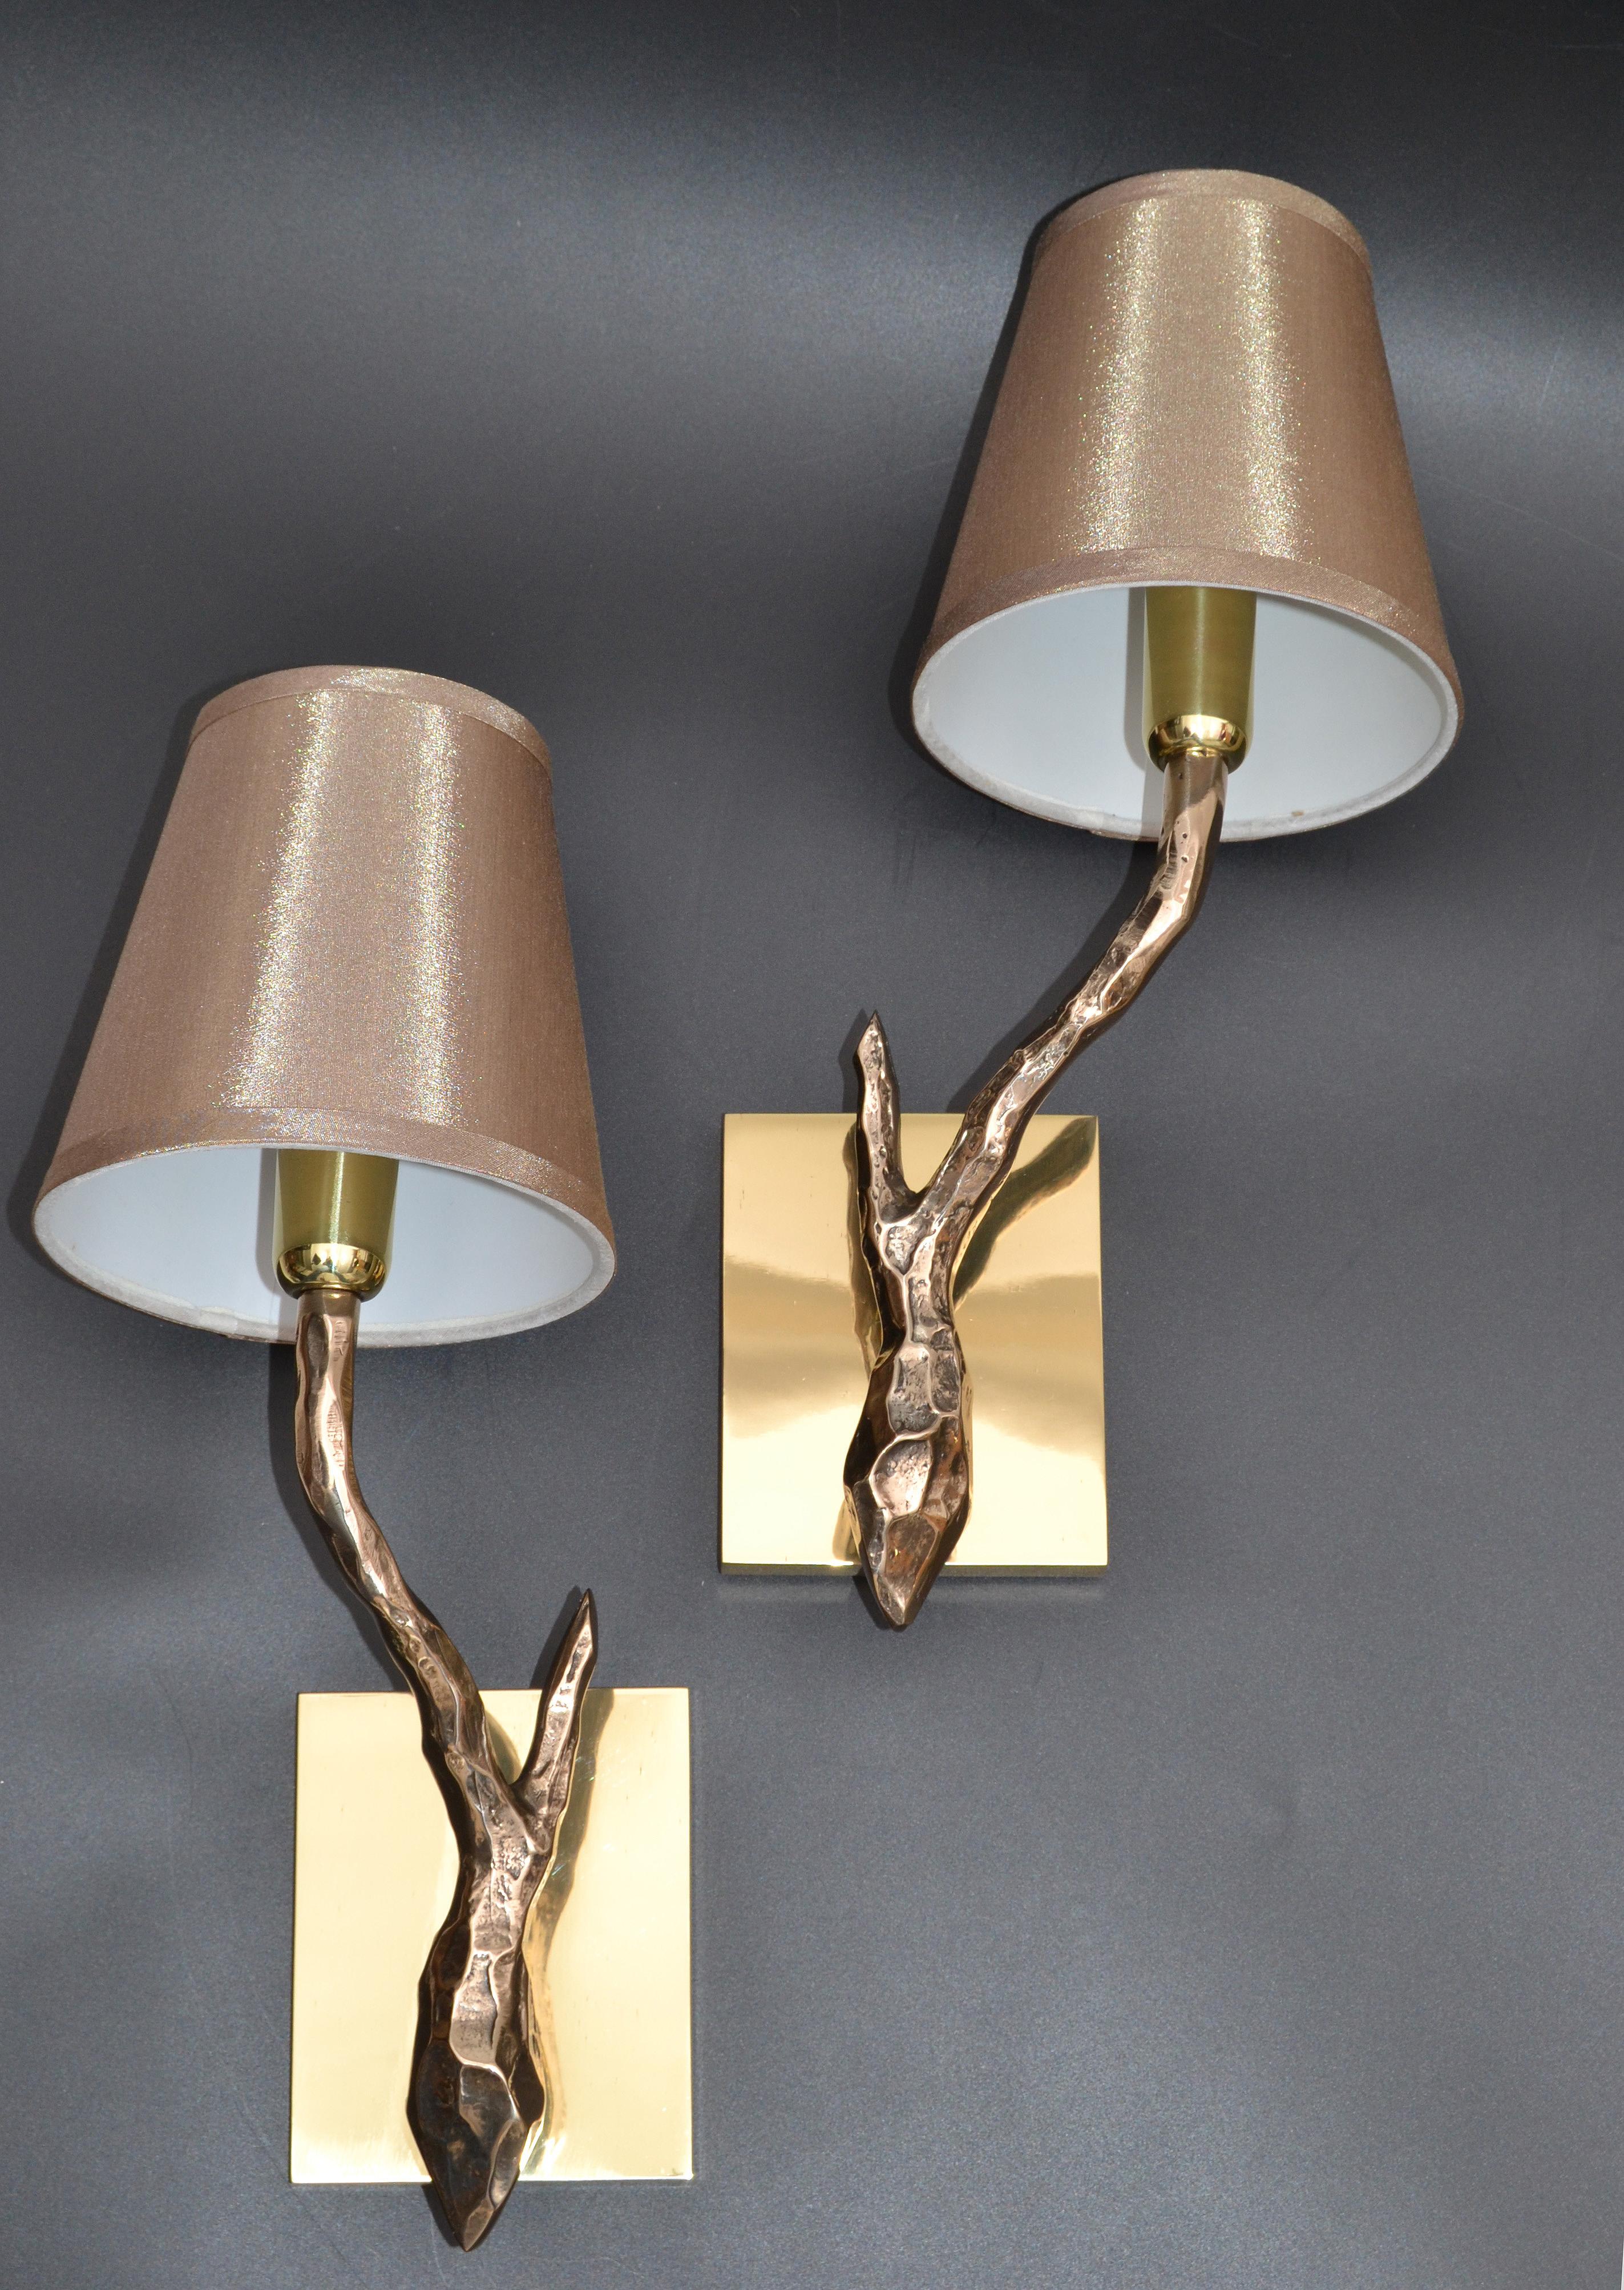 Superb pair of Agostini style bronze sconces with gold metallic fabric and white plastic shades.
Each wall sconce takes one-light bulb with max. 40 watts.
US rewired and in working condition.
Back plate dimension: 5 inches high, 4 inches